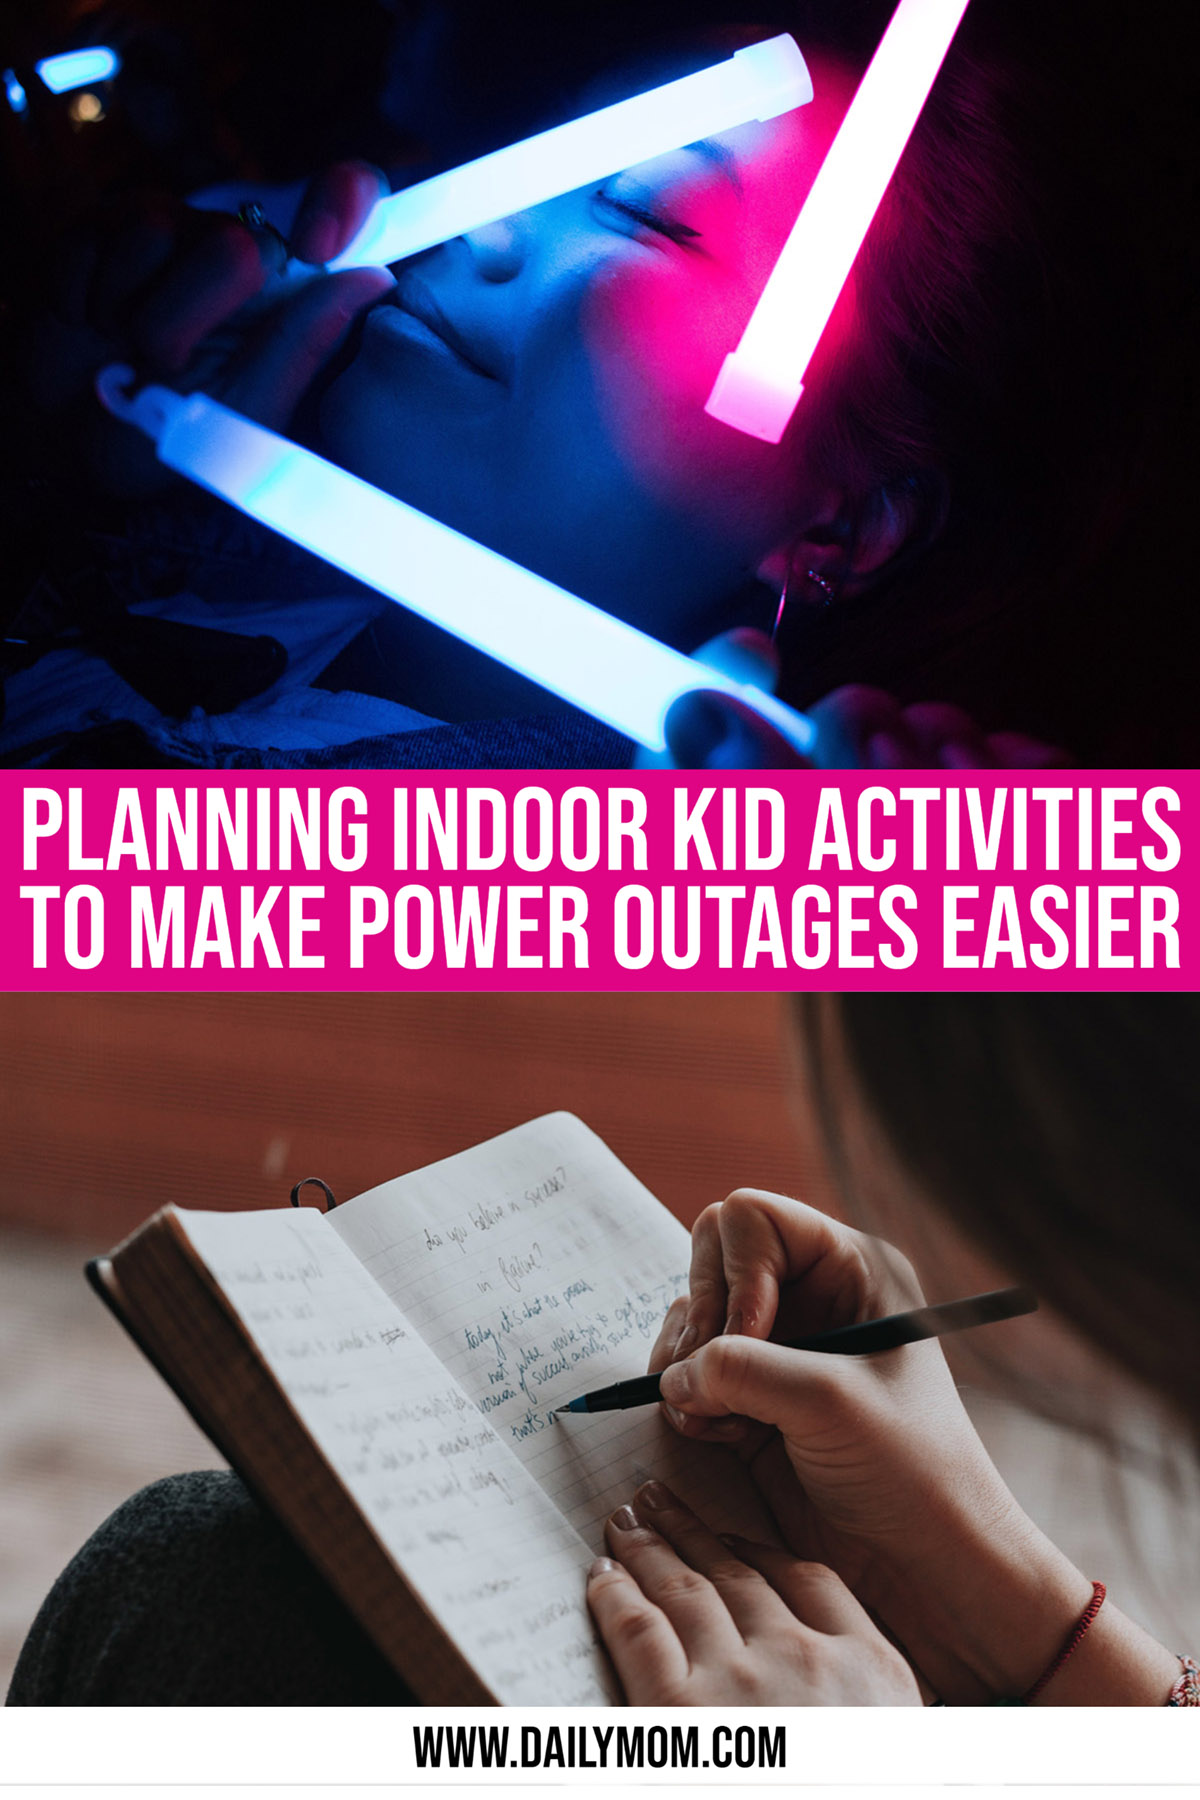 Indoor Kid Activities For Power Outages: 5+ Important Tips And Tricks To Plan Ahead